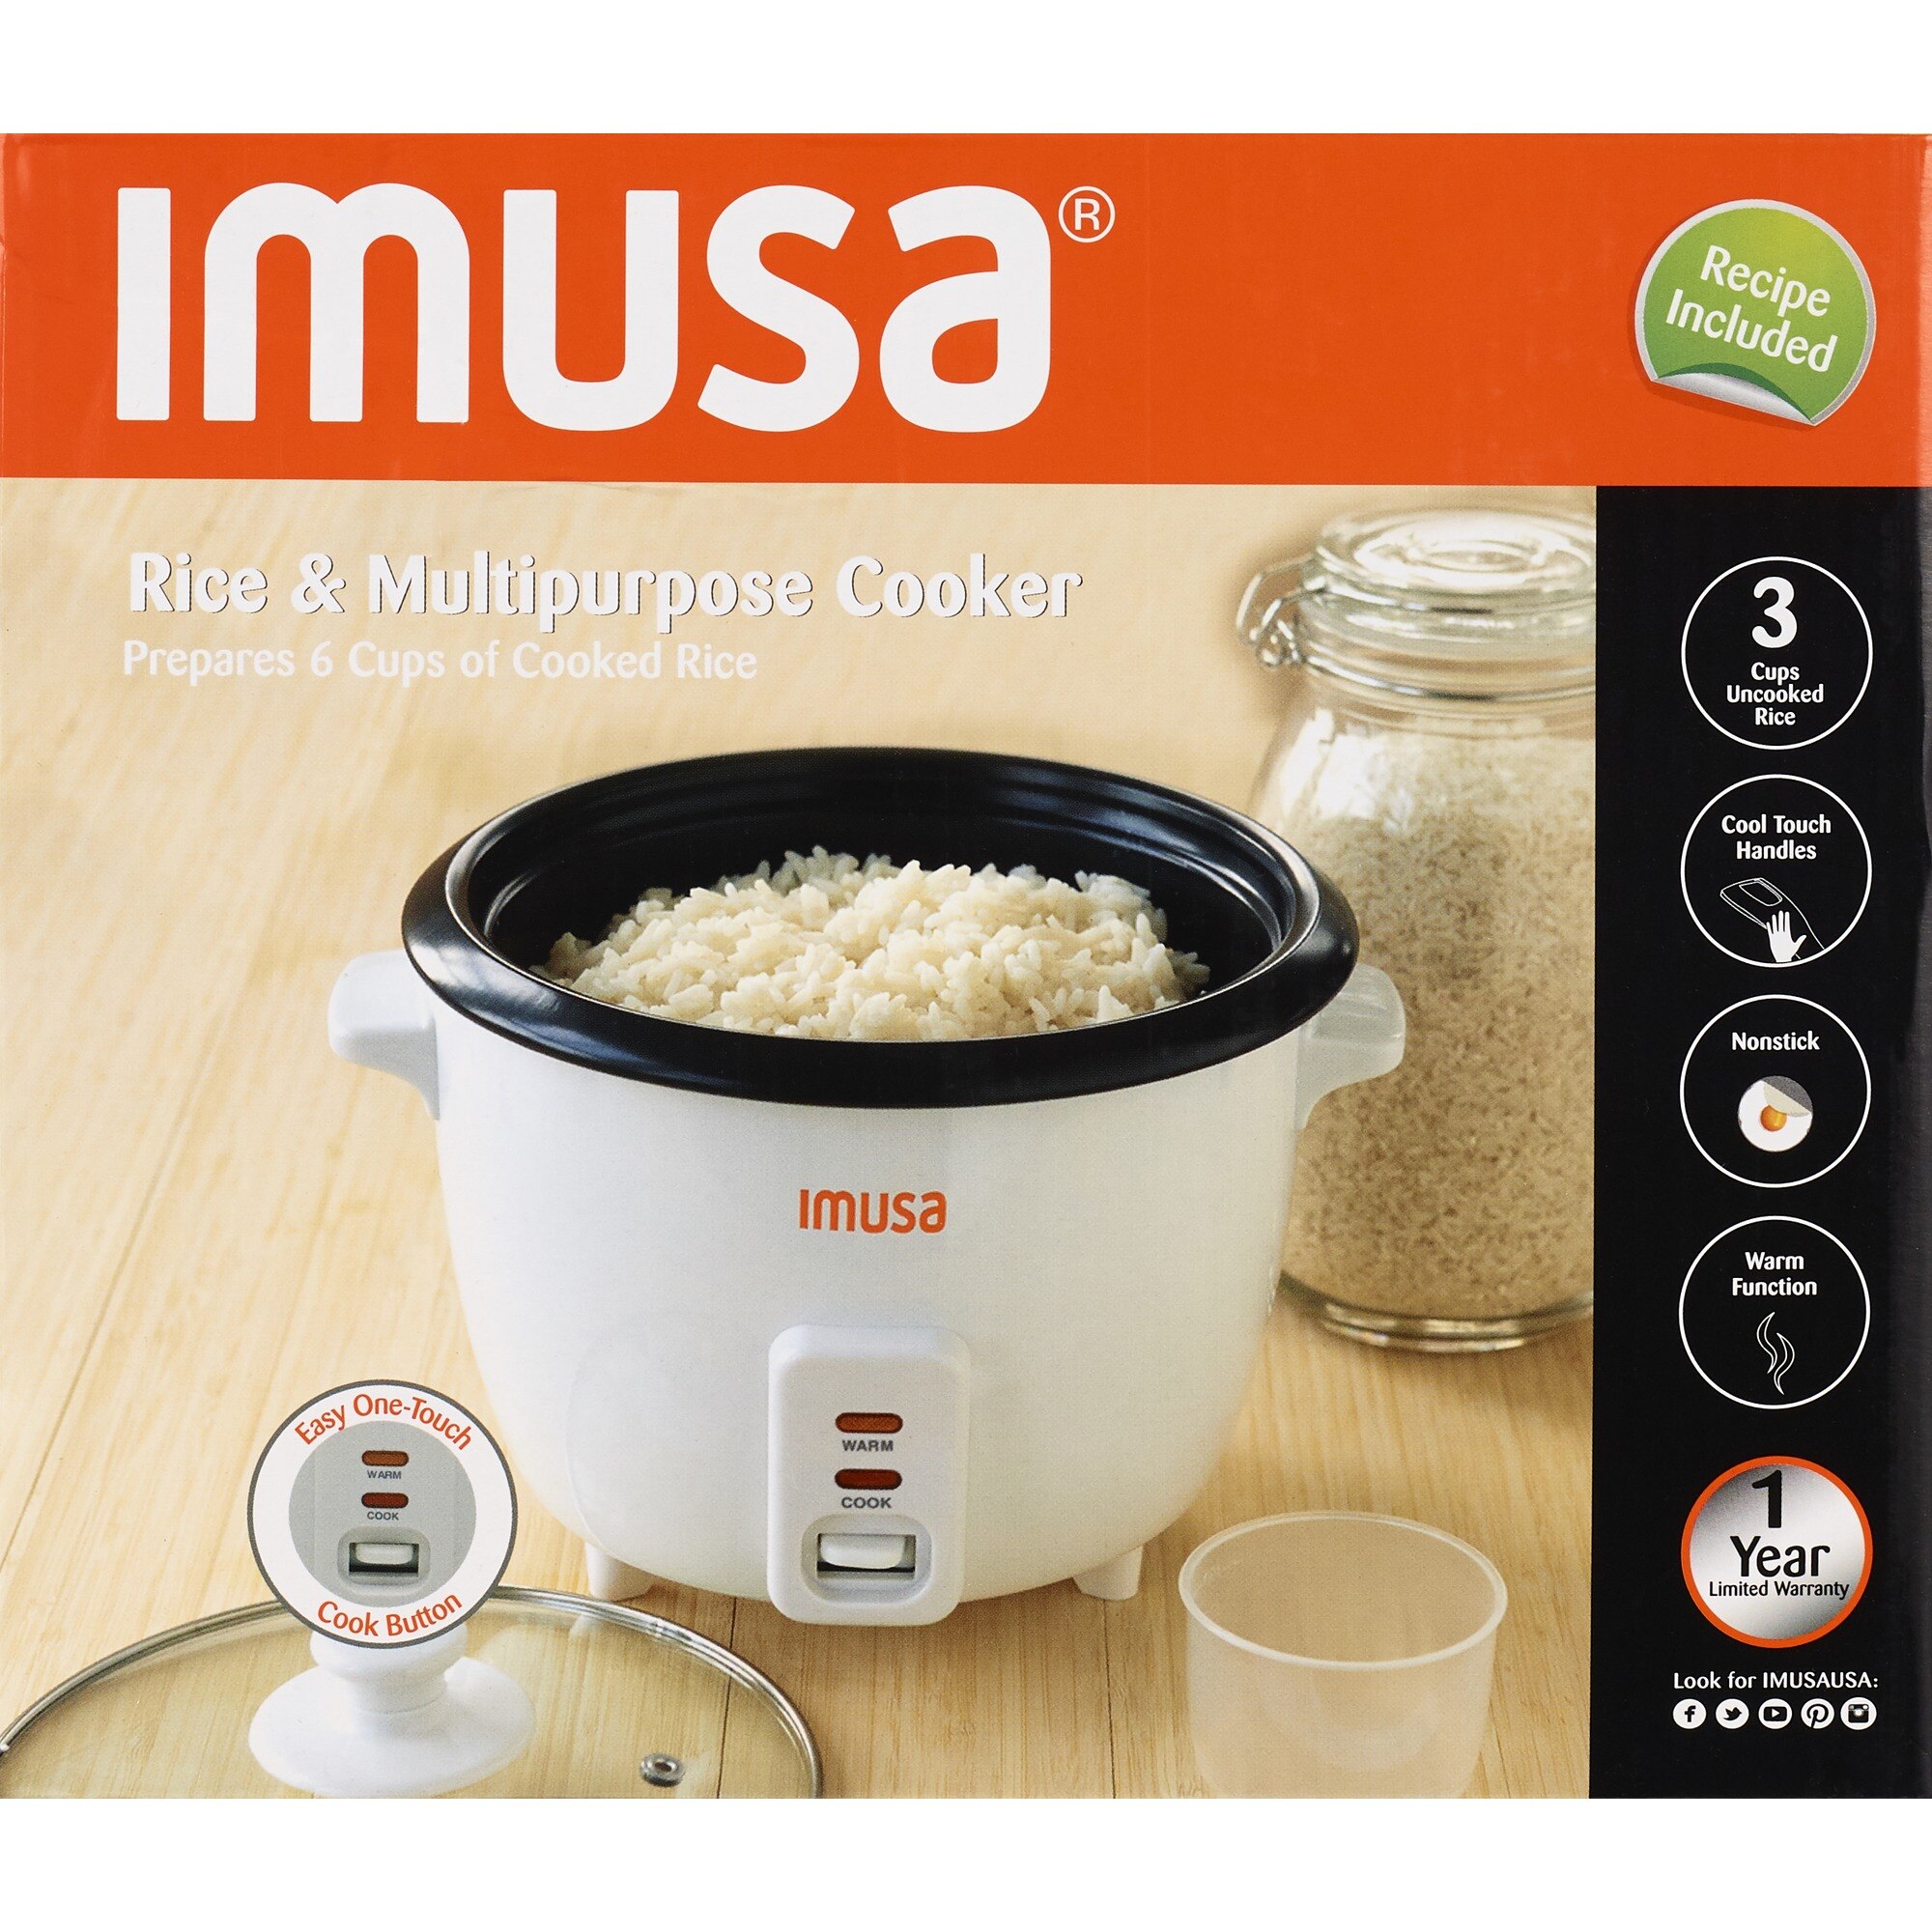 IMUSA Electric Rice Cooker With Spoon And Cup, 3 CUP , CVS